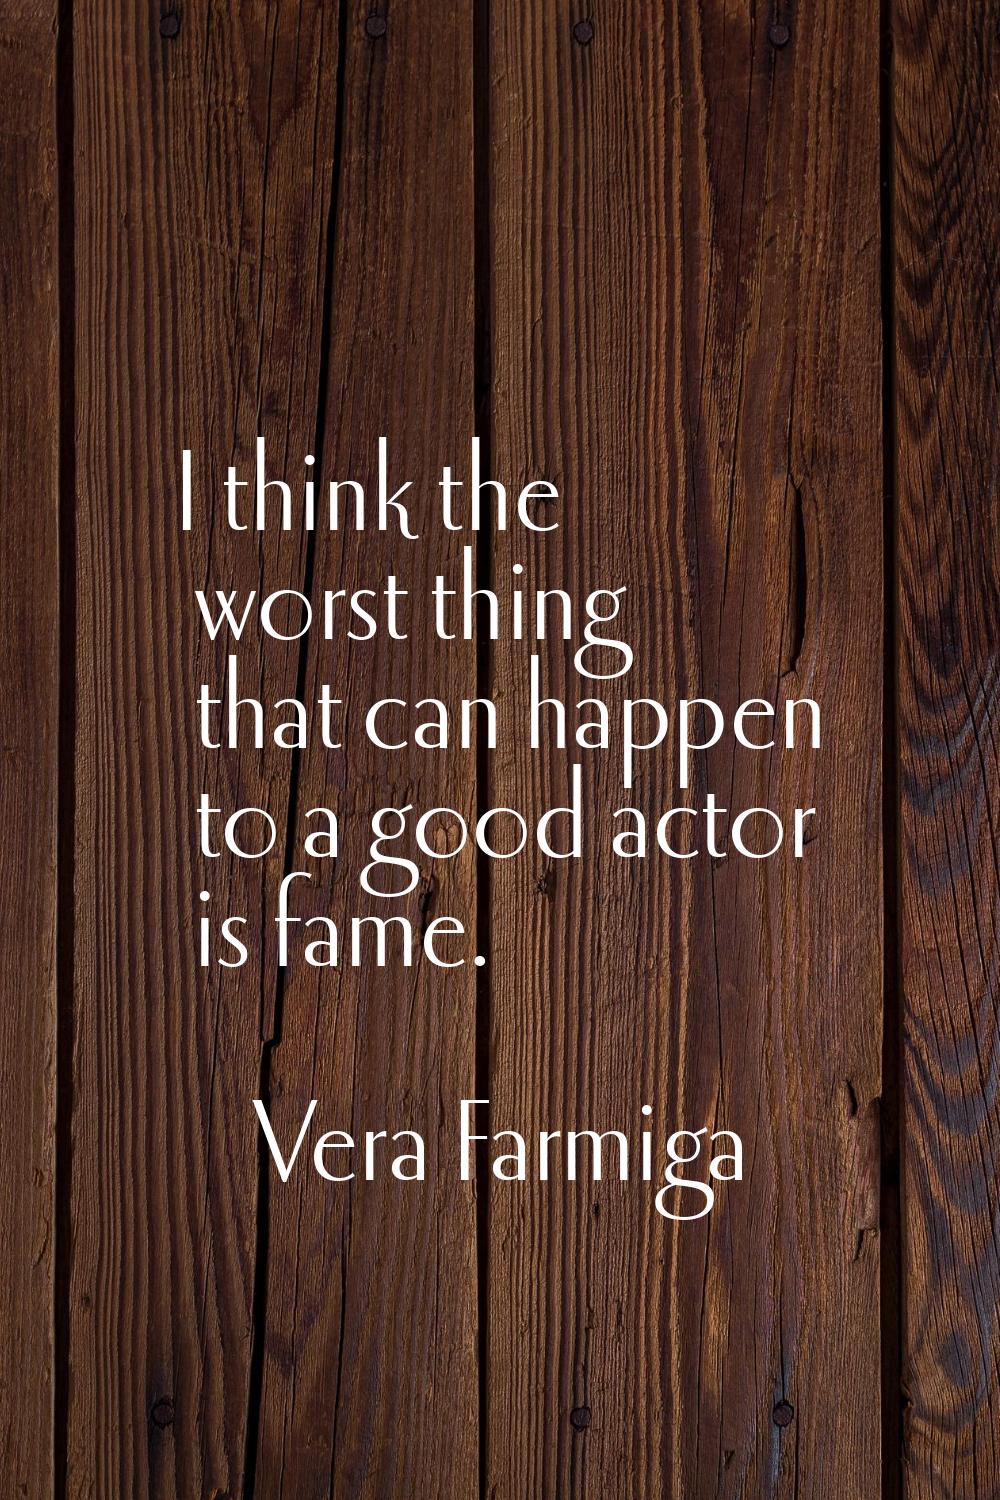 I think the worst thing that can happen to a good actor is fame.